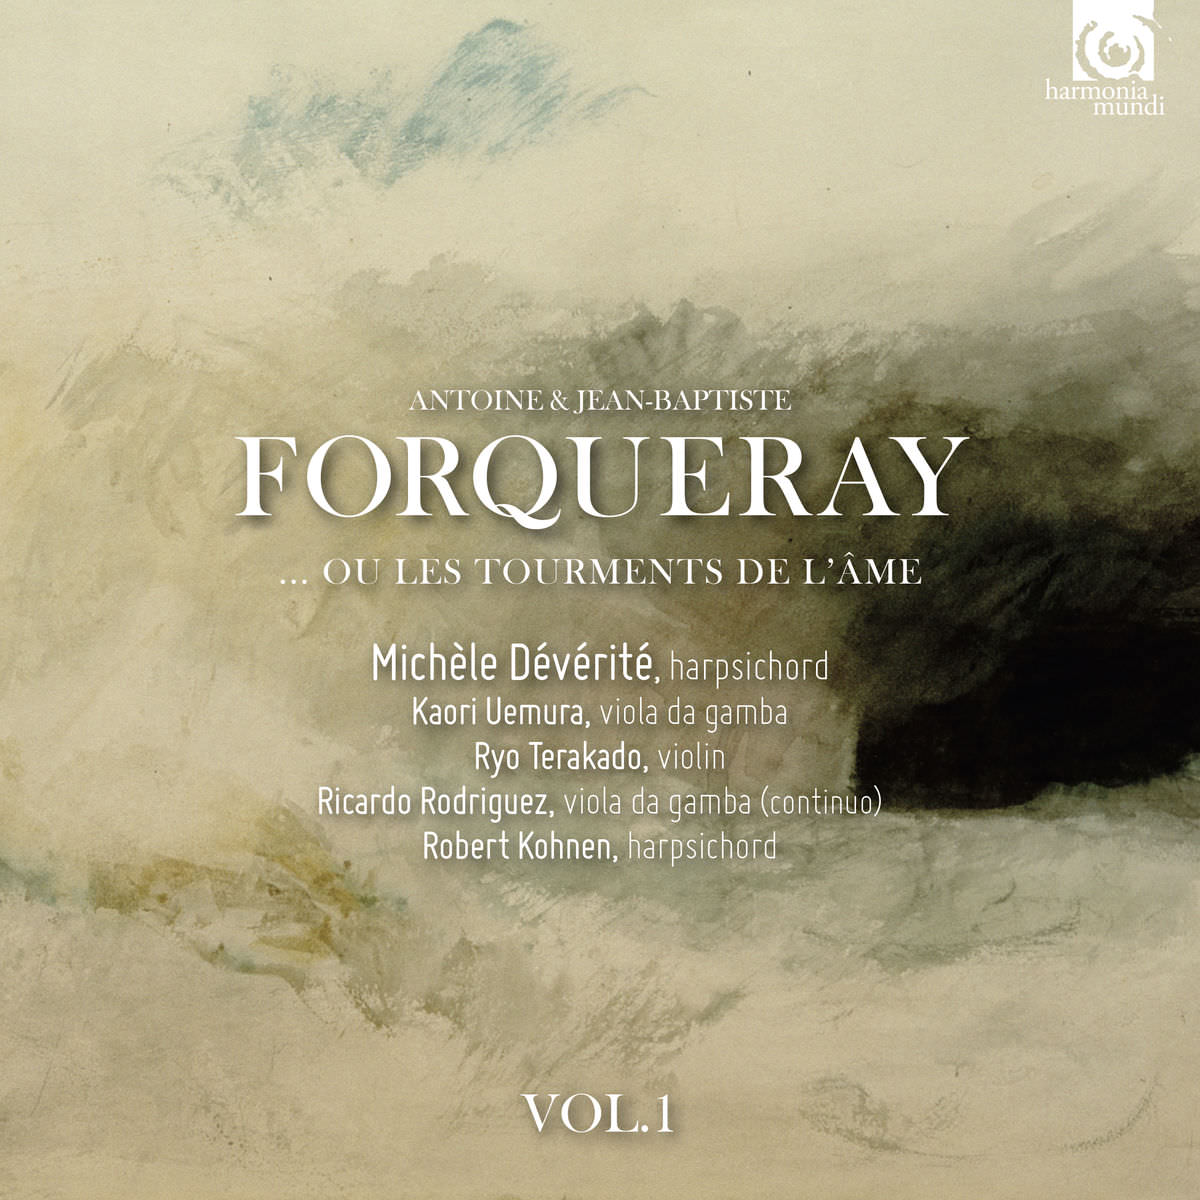 Michele Deverite - The Forquerays, or the Torments of the Soul, Vol. 1 (2018) [FLAC 24bit/48kHz]